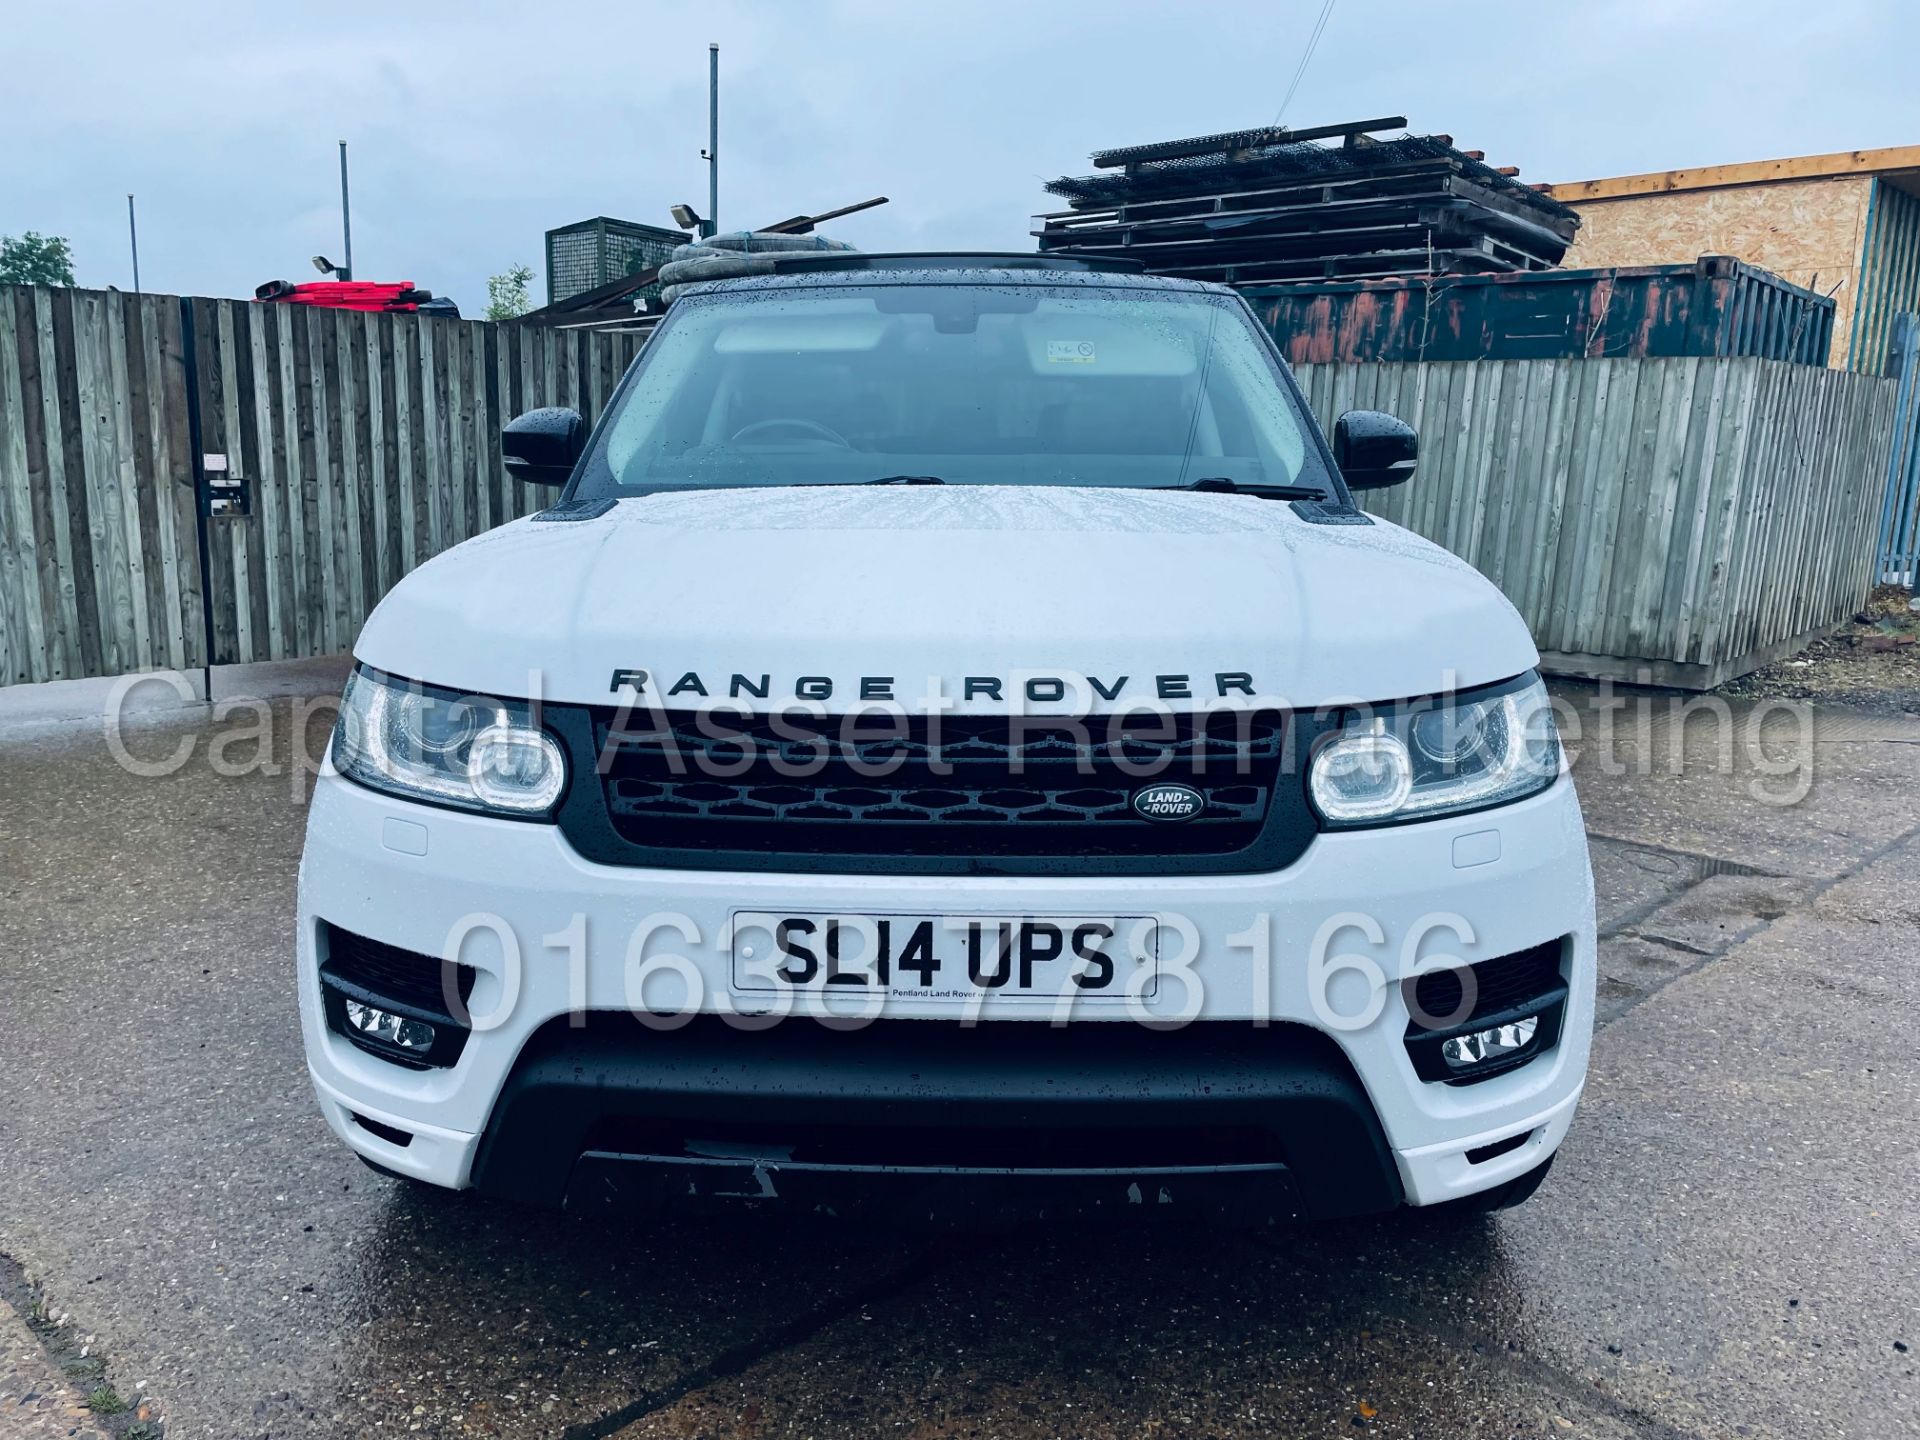 On Sale RANGE ROVER SPORT *SPECIAL EDITION* (2014) '3.0 TDV6 - AUTO' *SAT NAV & PAN ROOF* (TOP SPEC) - Image 14 of 54